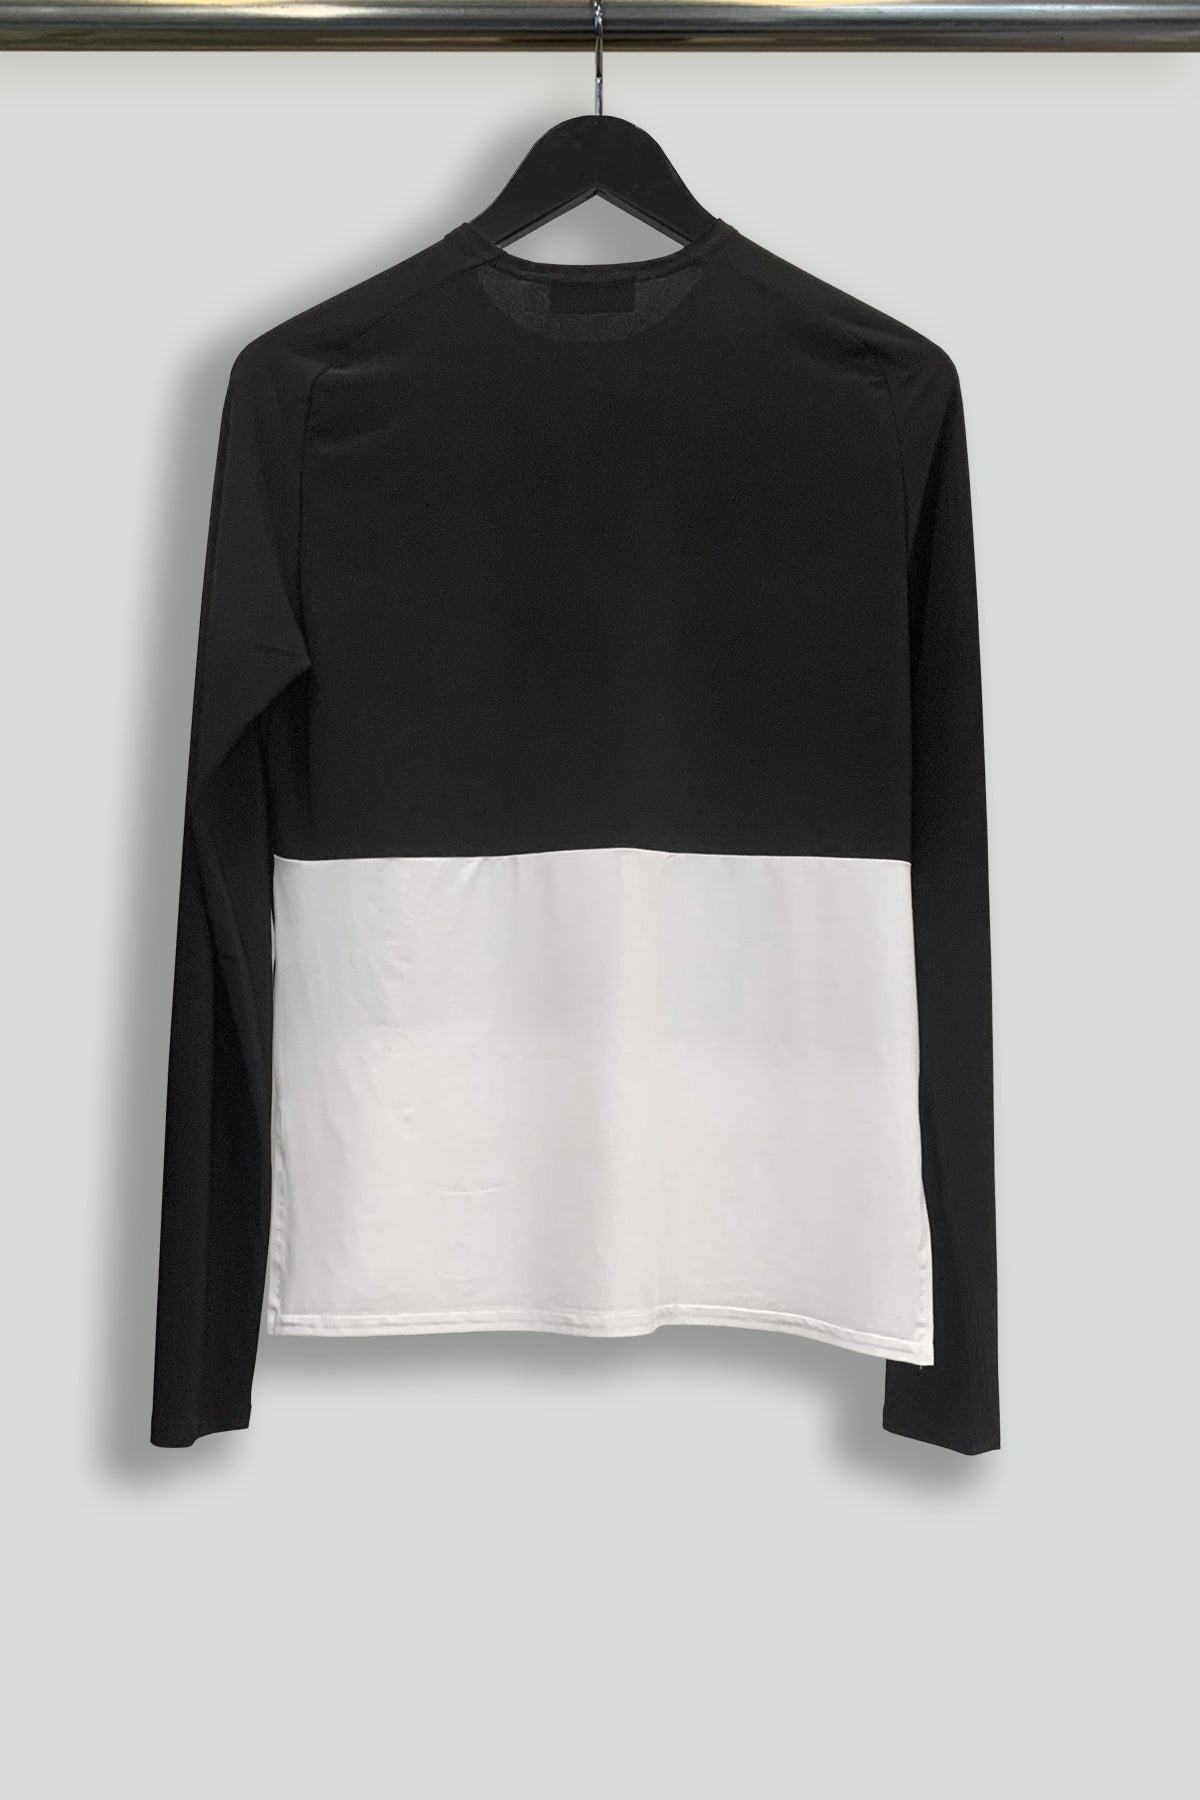 Black and White Knit Jersey Color-Blocked Combo Long Raglan Sleeve Crew - Hanger Back